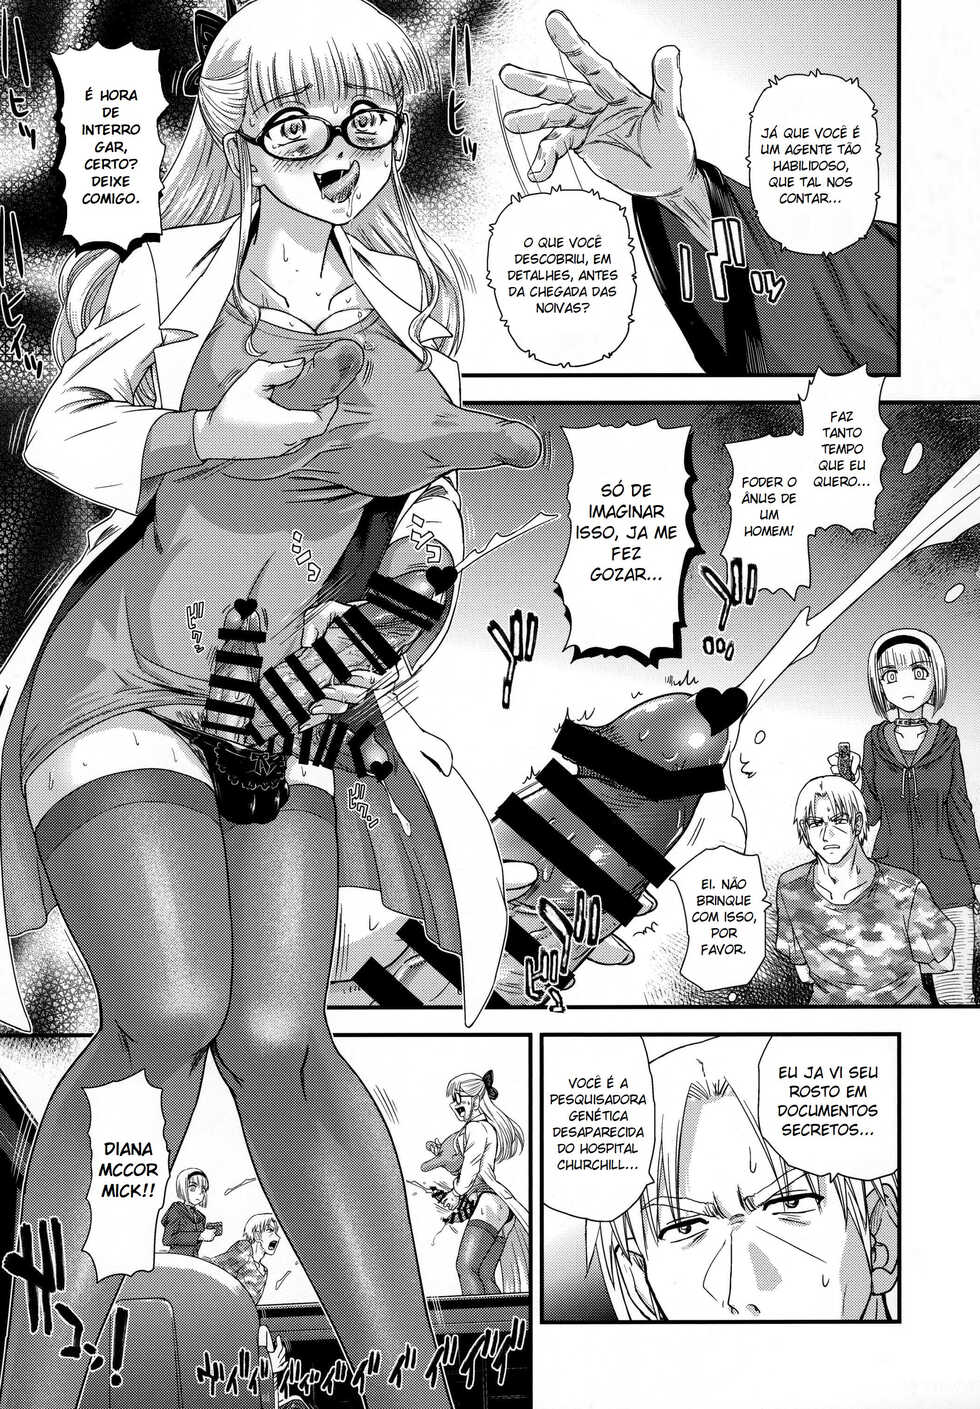 (C95) [Behind Moon (Dulce-Q)] DR:II ep.7 ~Dulce Report~ [Portuguese-BR] - Page 10